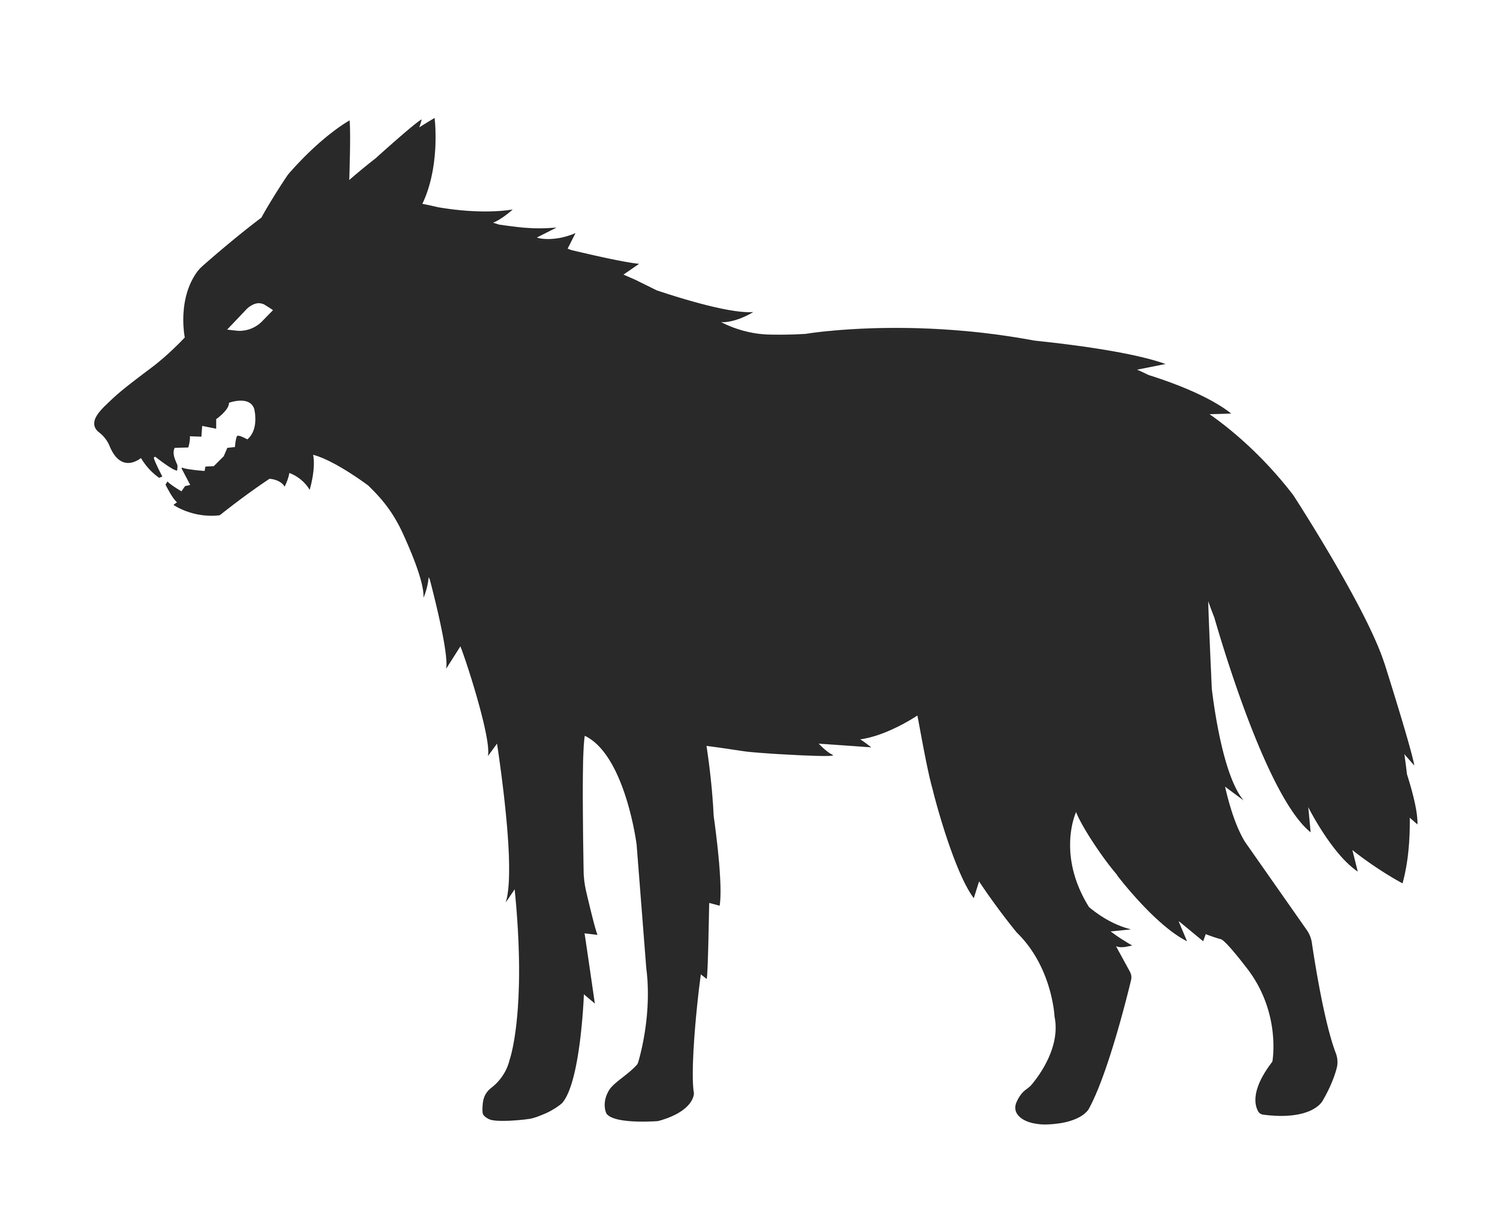 Craftsman and Wolves